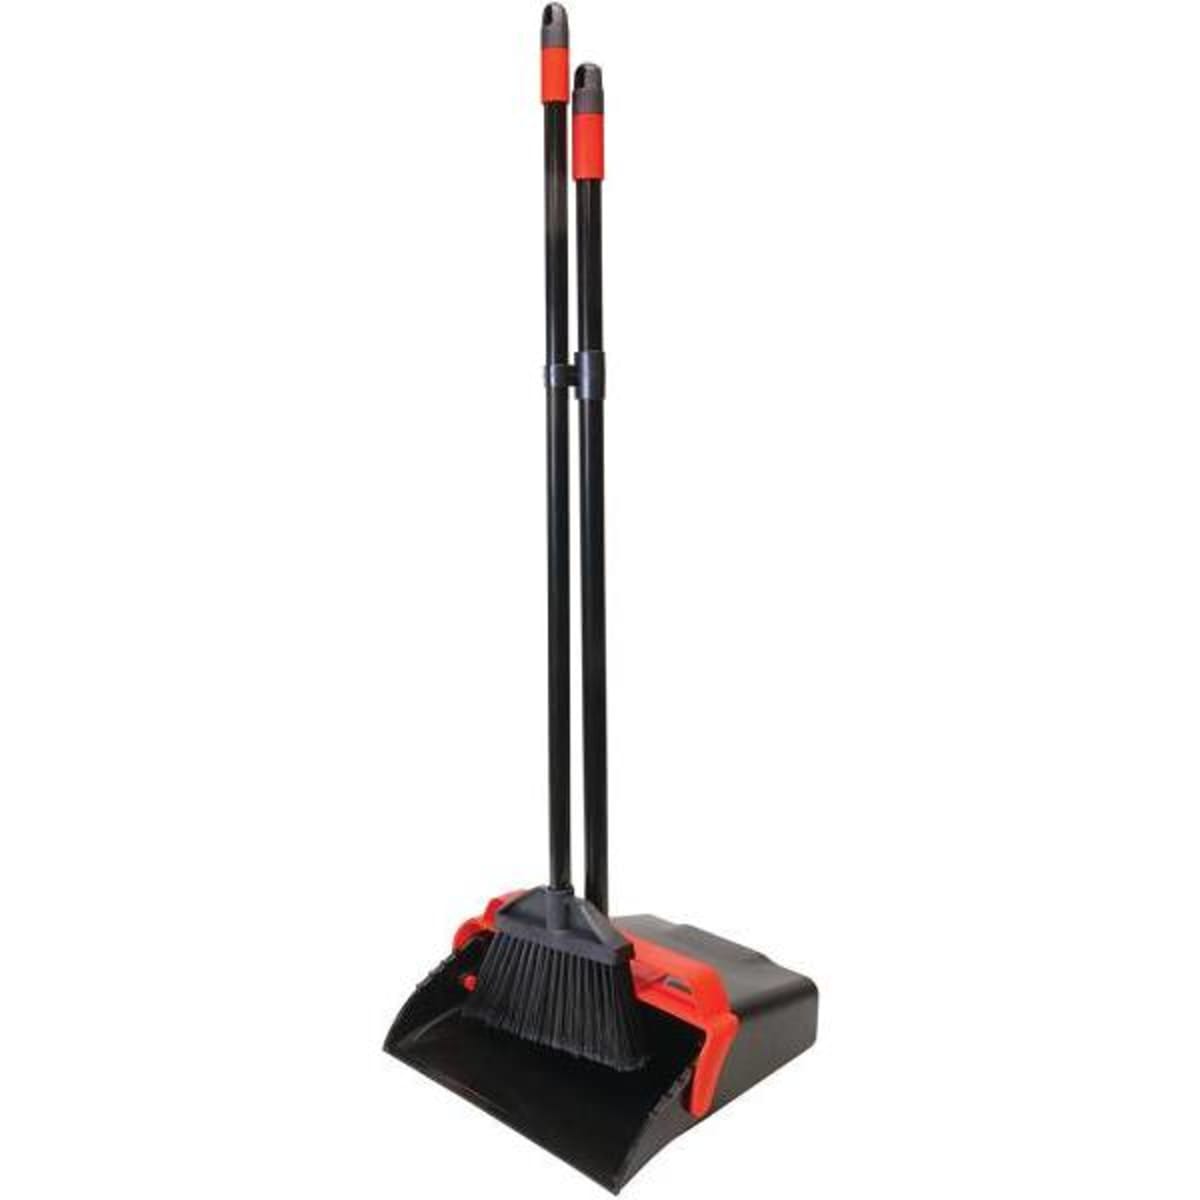 Rubbermaid Commercial Products Executive Series Lobby Broom, 7.5, Black, Brooms and Dustpans, Janitorial Supplies, Janitorial, Housekeeping and  Janitorial, Open Catalog